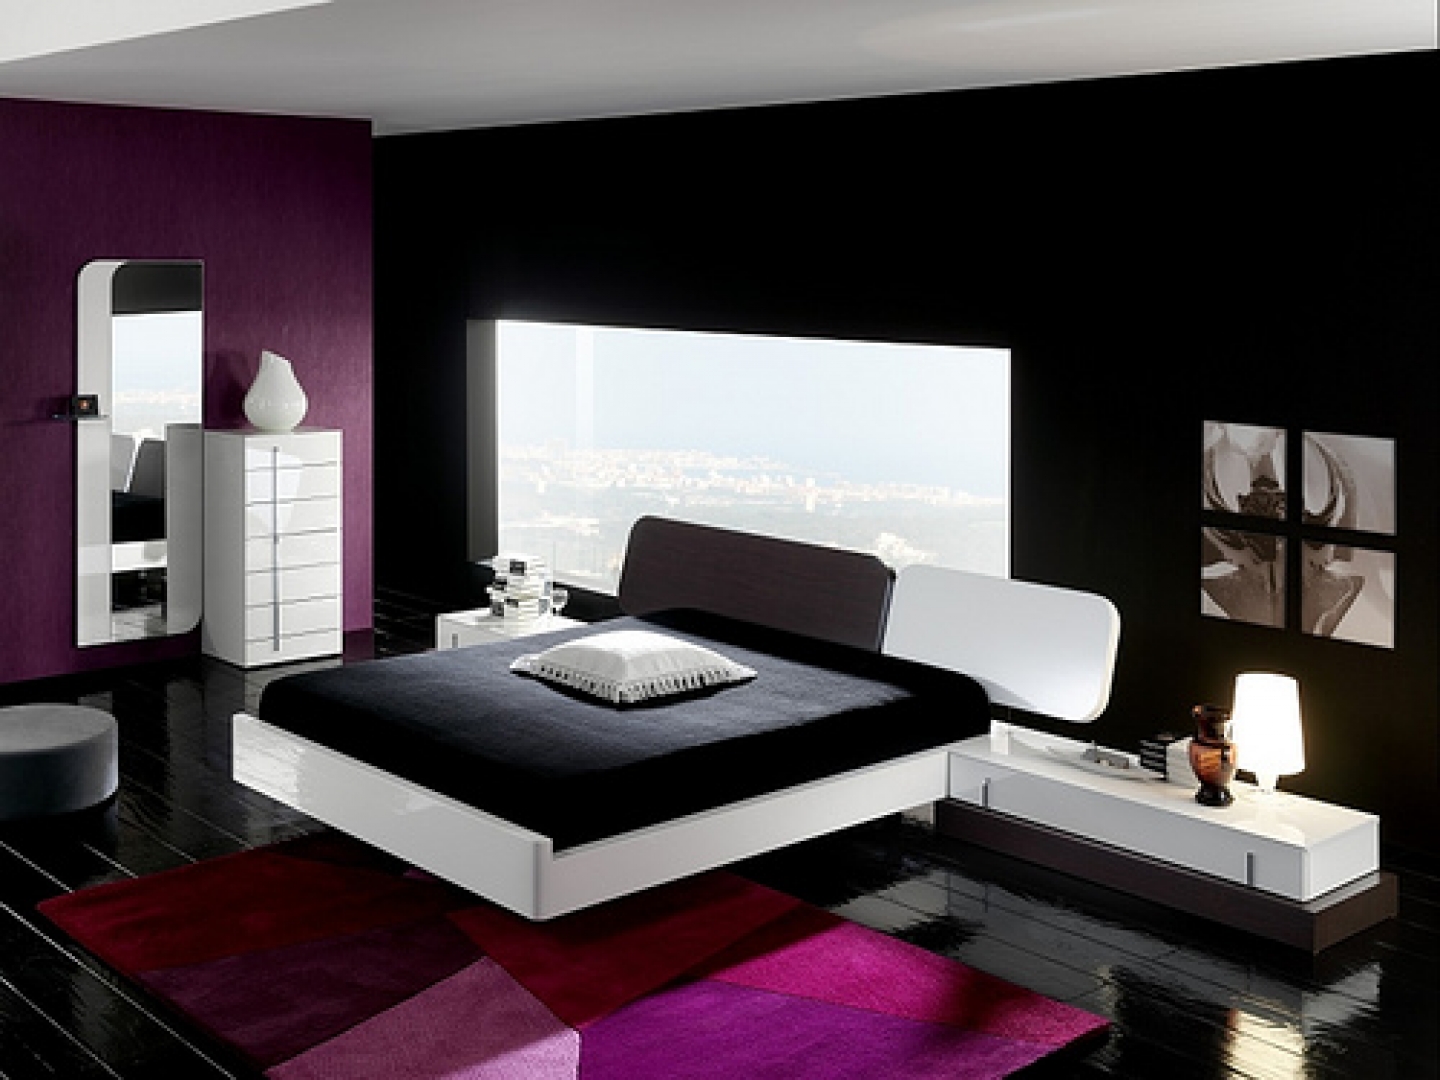 Room Interior Design For Small Bedroom With Black And White Bedroom And Wall Black Laminated Flooring Pillow Large Rug Round Chair Lamp Small Long Table White Cupboard Lamp And Window With Amazing Views Bedroom